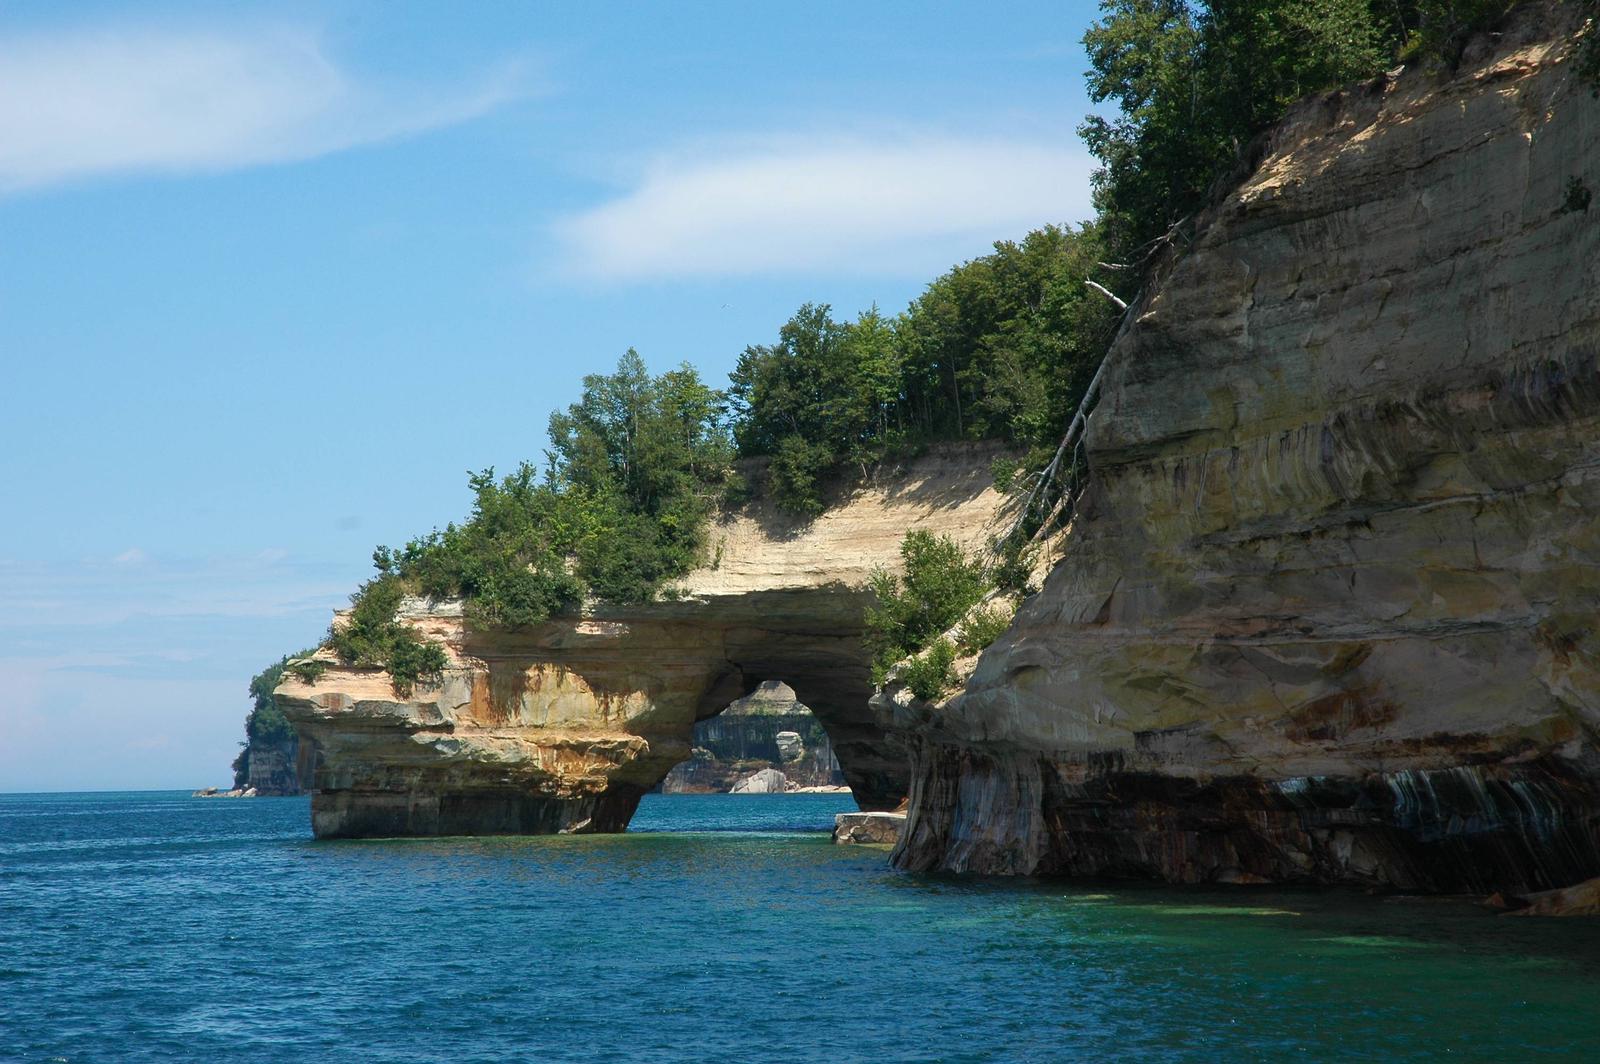 A view looking to the east through Lover's Leap A picture of Lover's Leap a rock formation along the shores of Pictured Rocks National Lakeshore